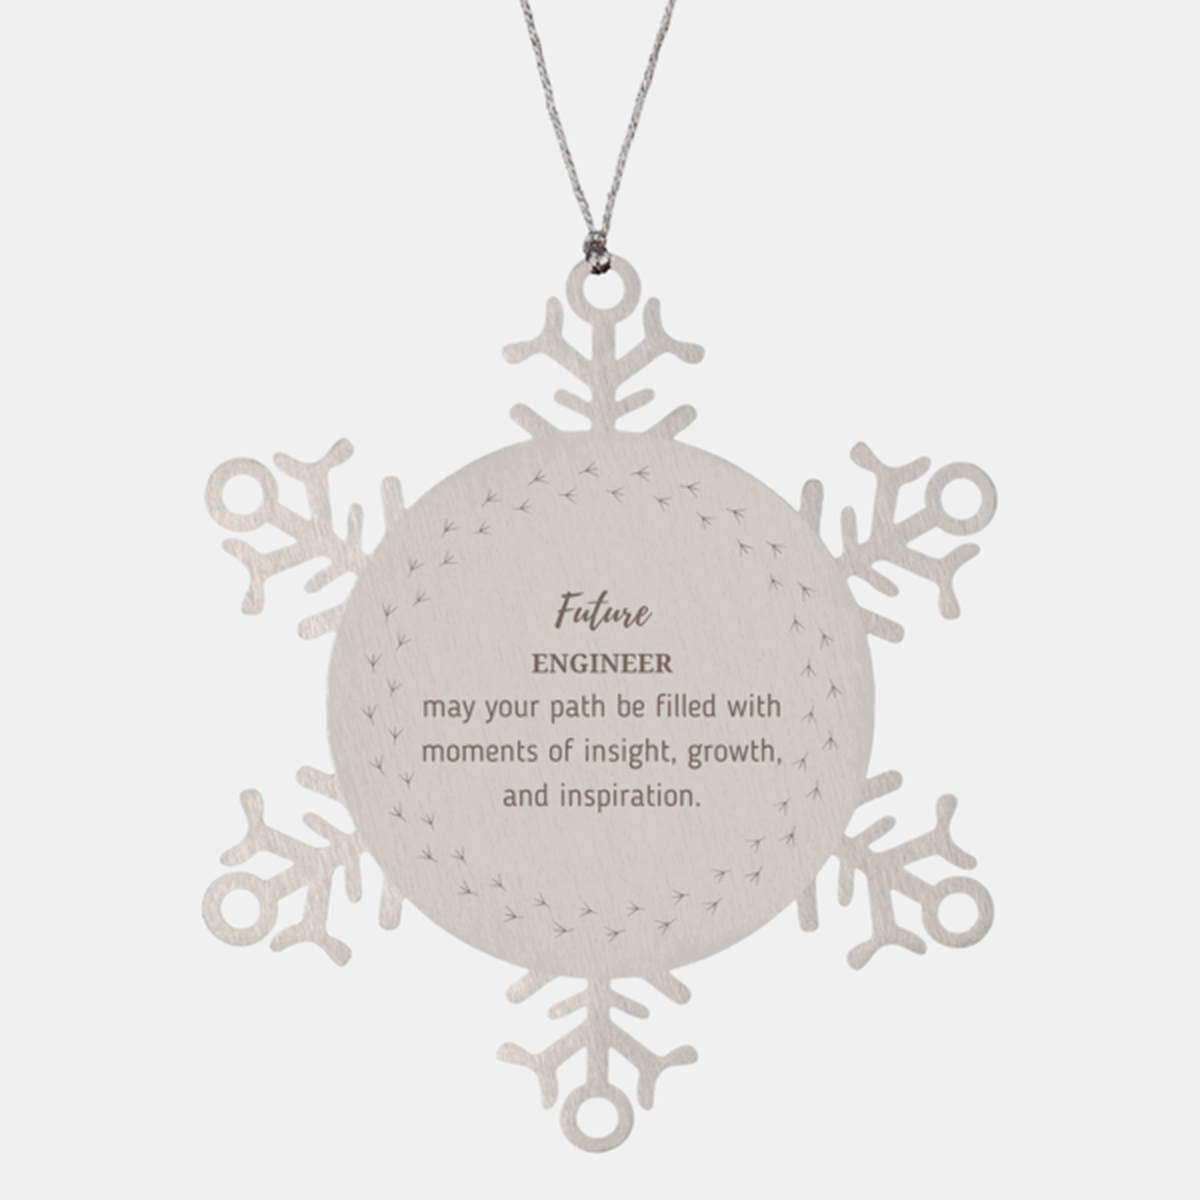 Future Engineer Gifts, May your path be filled with moments of insight, Graduation Gifts for New Engineer, Christmas Unique Snowflake Ornament For Men, Women, Friends